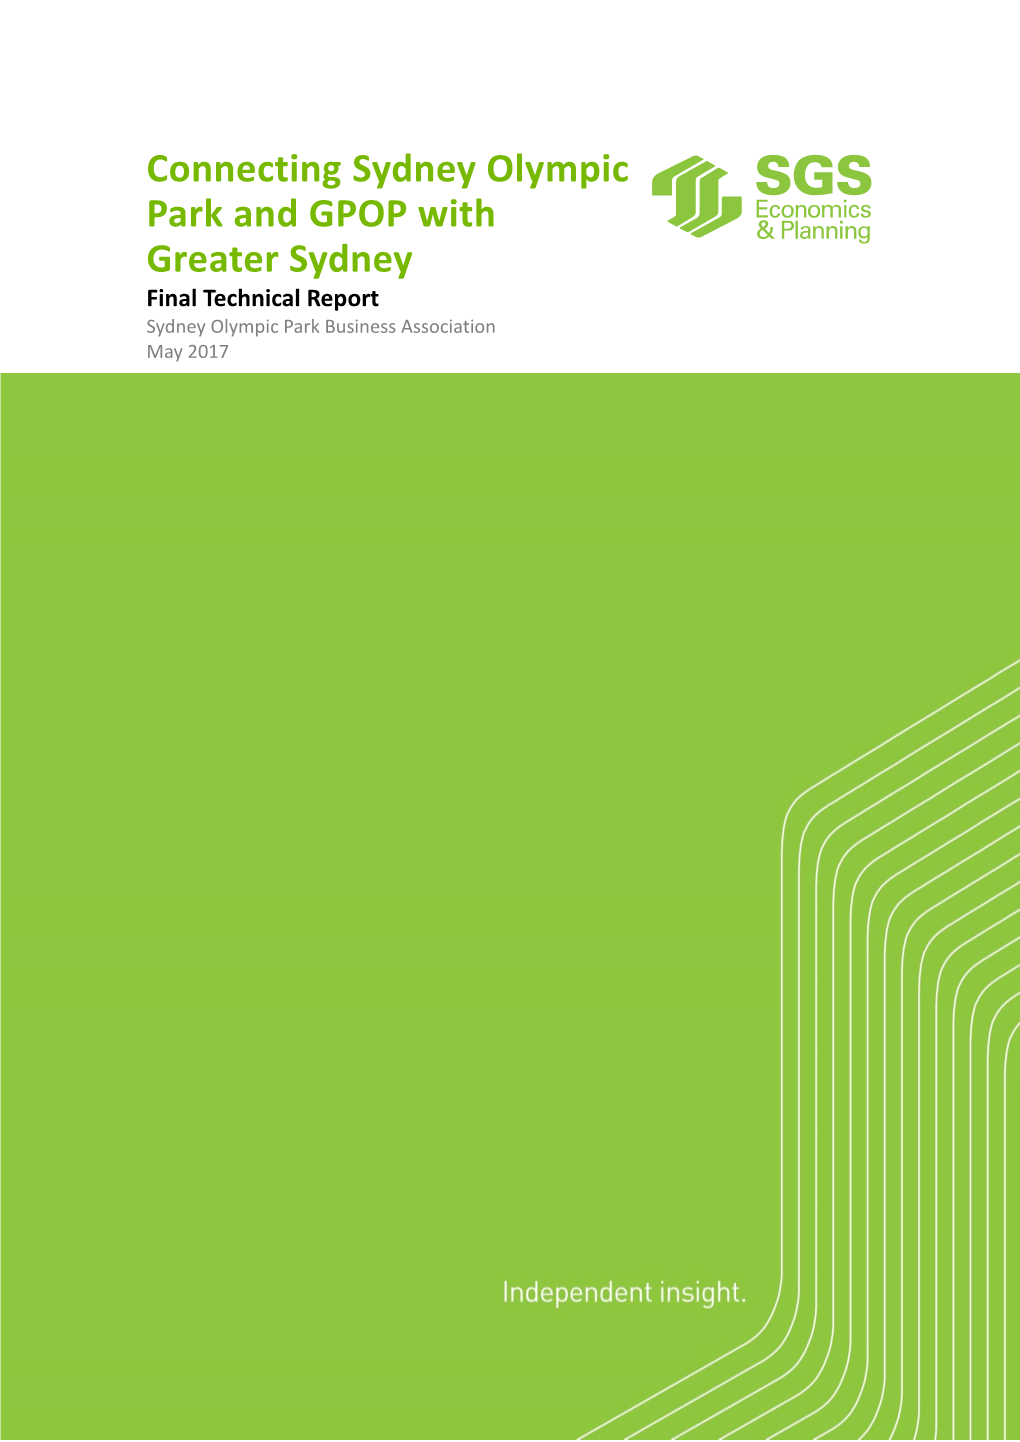 Connecting Sydney Olympic Park and GPOP with Greater Sydney Final Technical Report Sydney Olympic Park Business Association May 2017